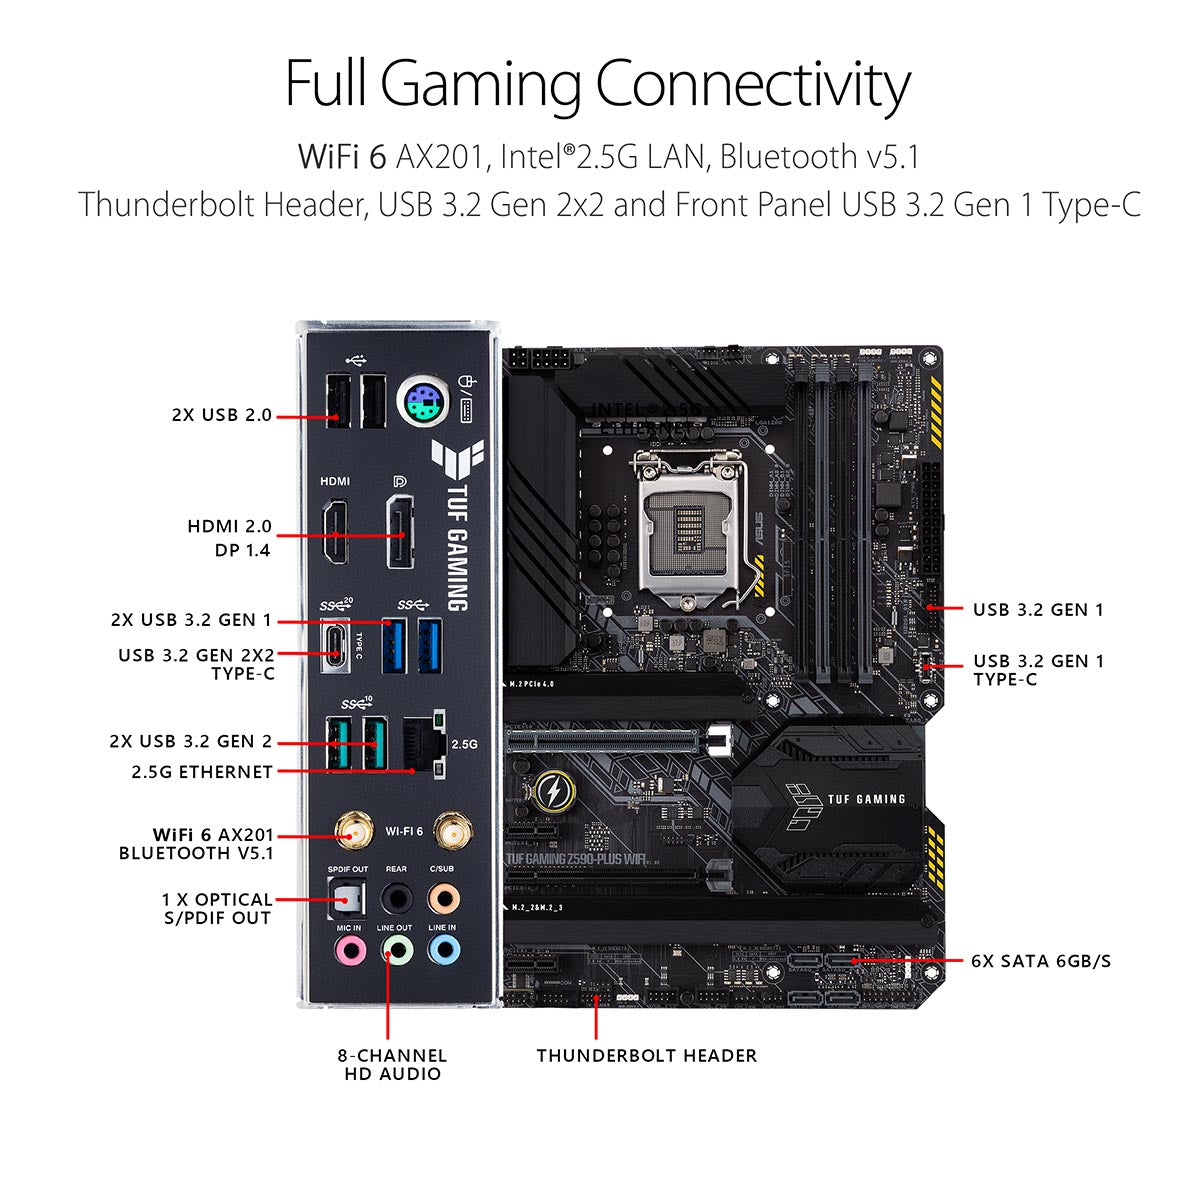 ASUS TUF Gaming Z590-Plus WiFi ATX LGA 1200 Motherboard with WiFi 6 and AI Noise Cancelation